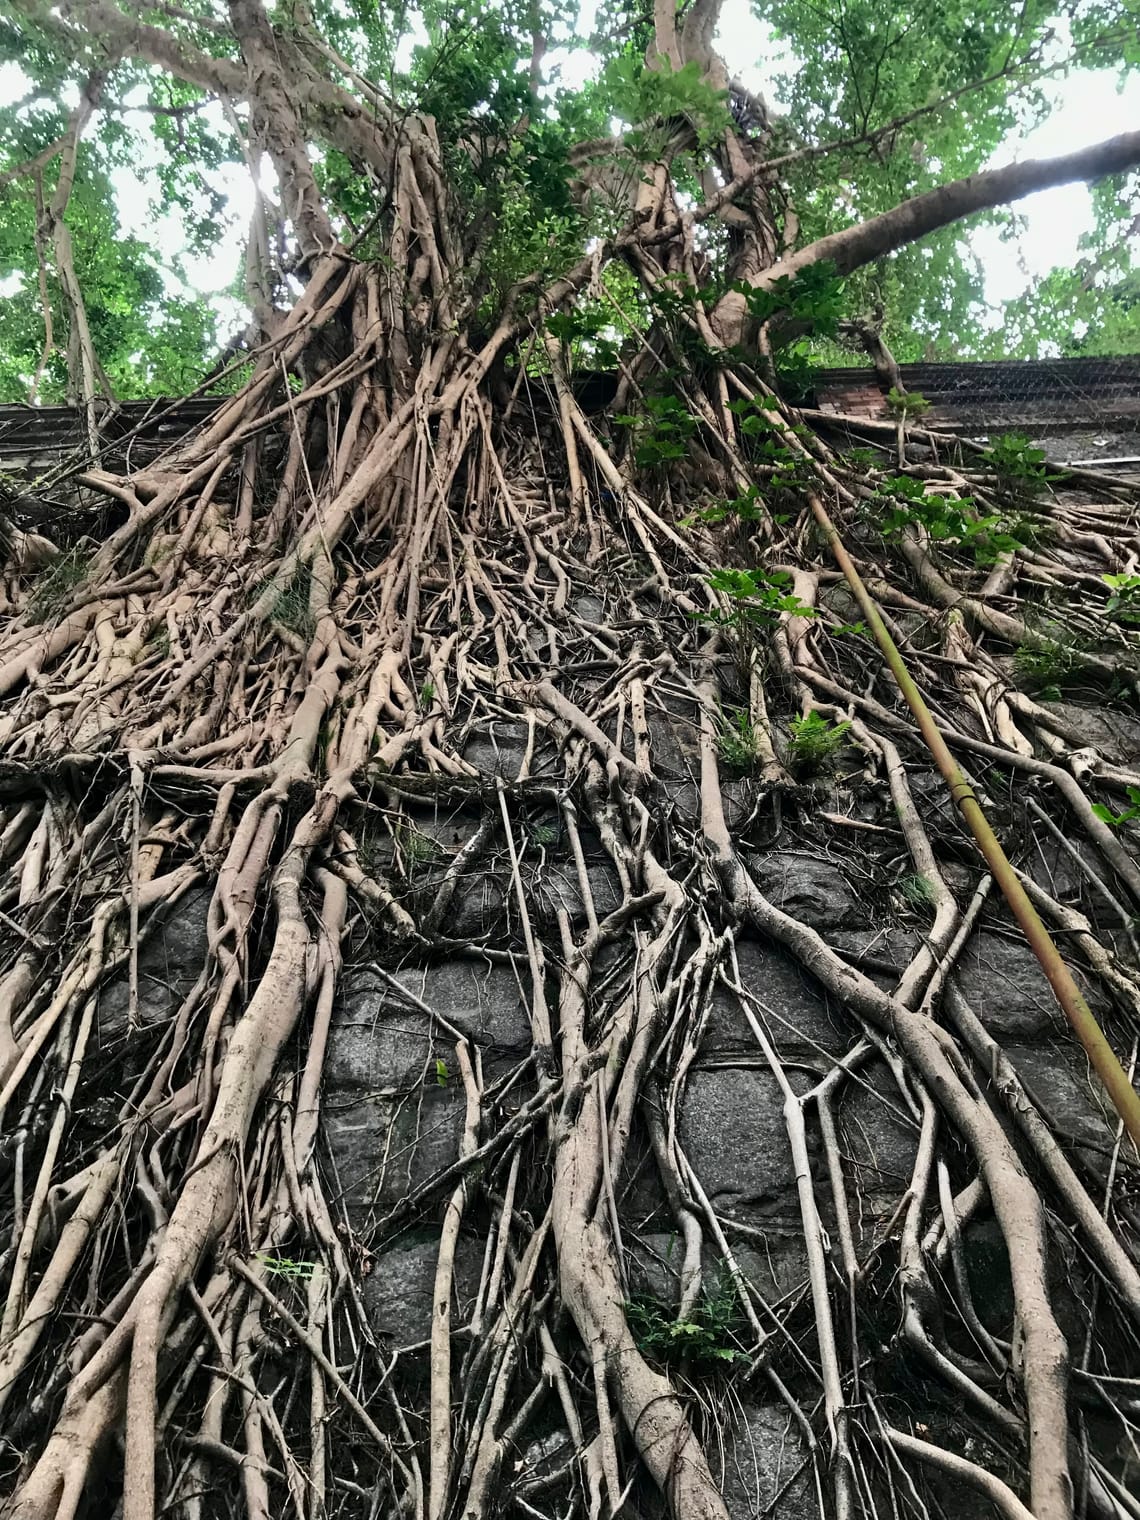 We look up to see the roots of the banyan cascading down a stone wall. 